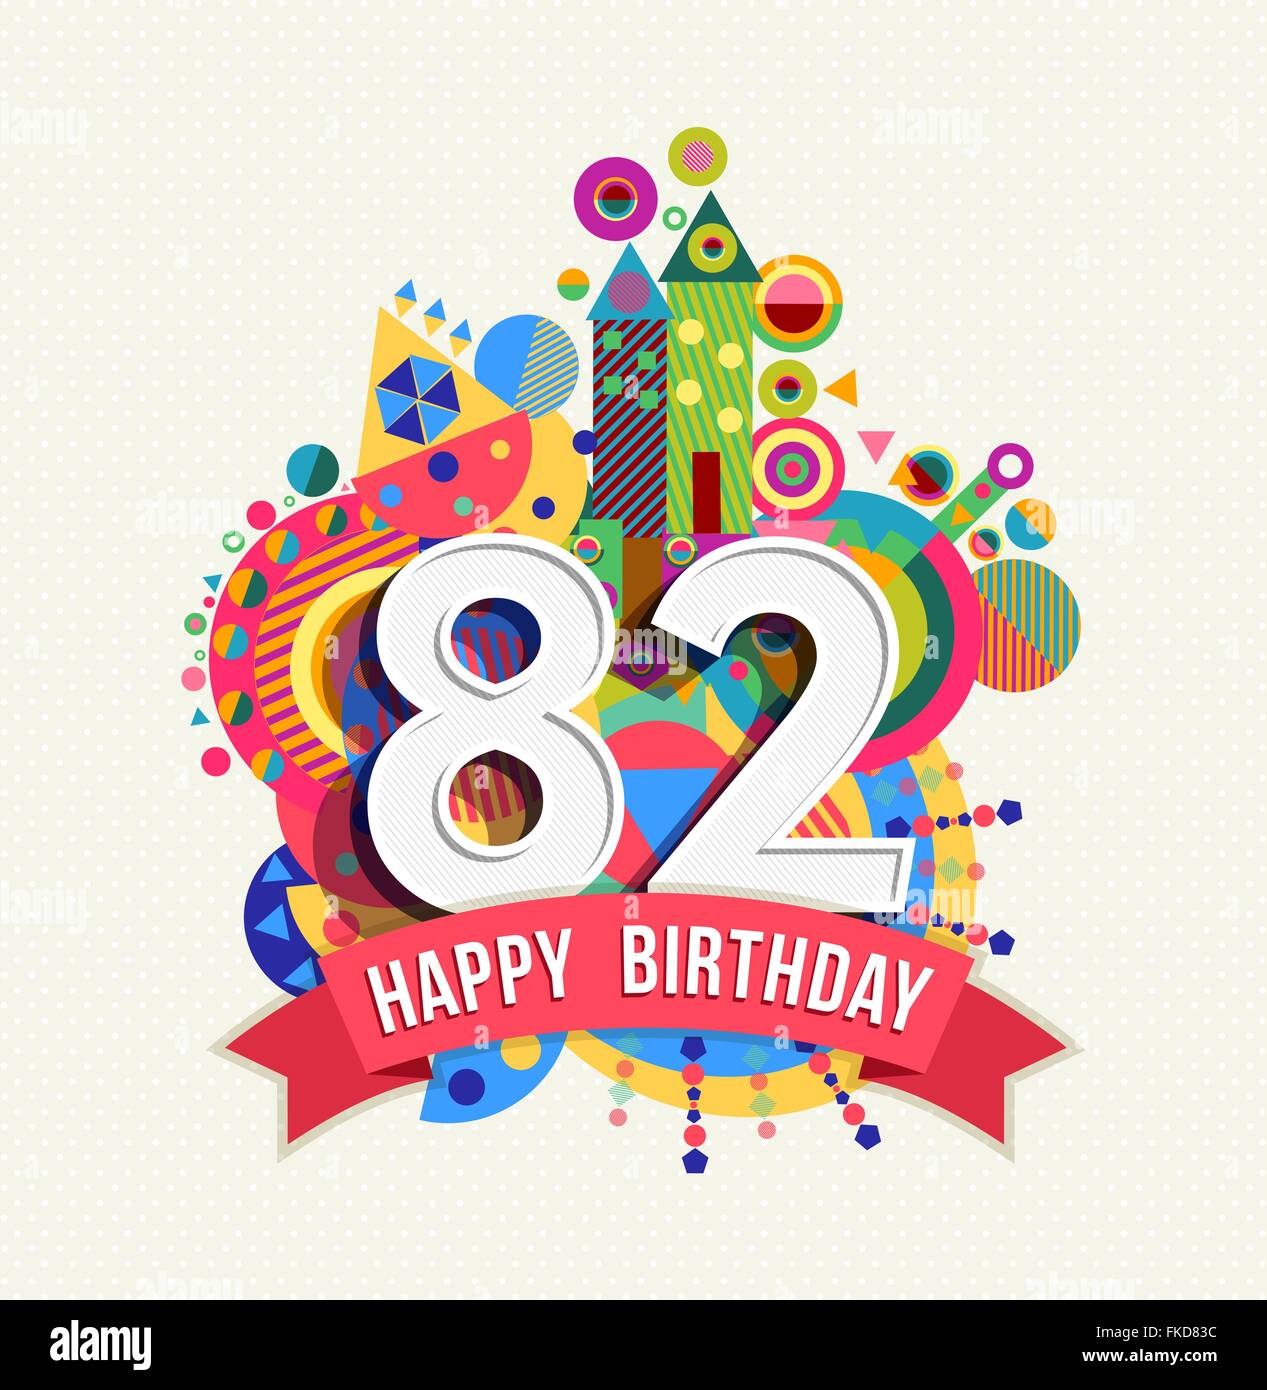 Happy Birthday eighty two 82 year, fun celebration anniversary greeting card with number, text label and colorful geometry Stock Vector